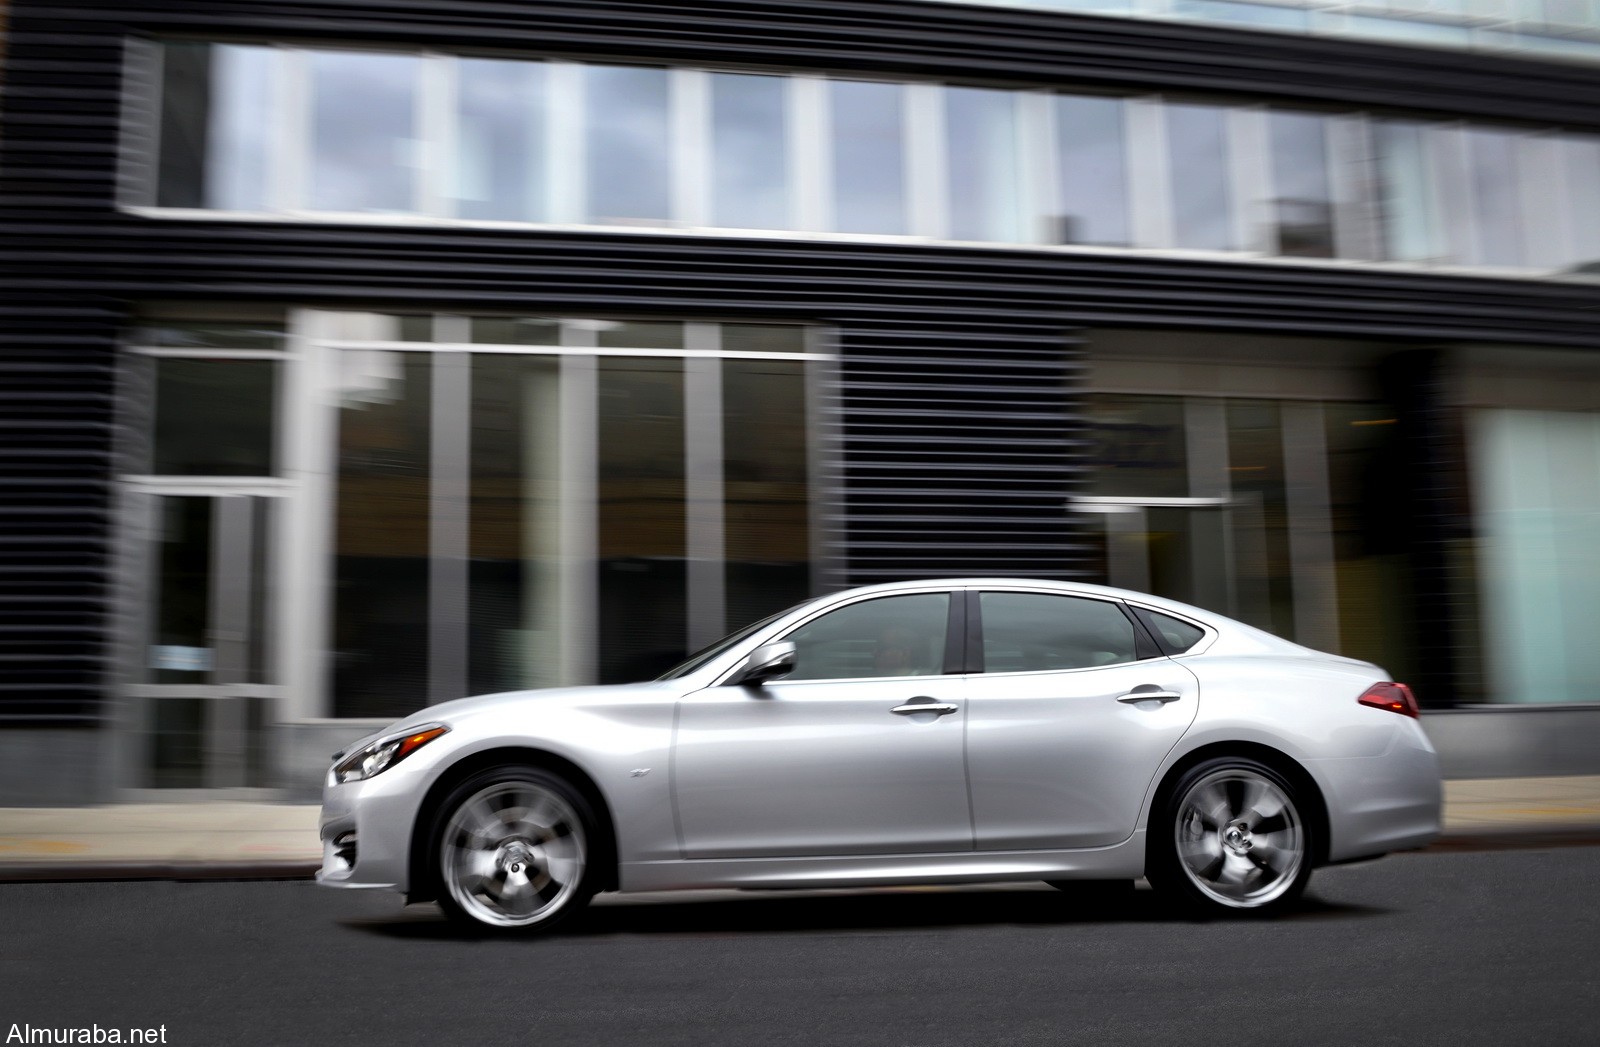 As InfinitiÕs flagship performance luxury sedan, the Q70 is a showcase of advanced technologies. It embraces the essence of all things Infiniti Ð style, performance, luxury, craftsmanship and technology.